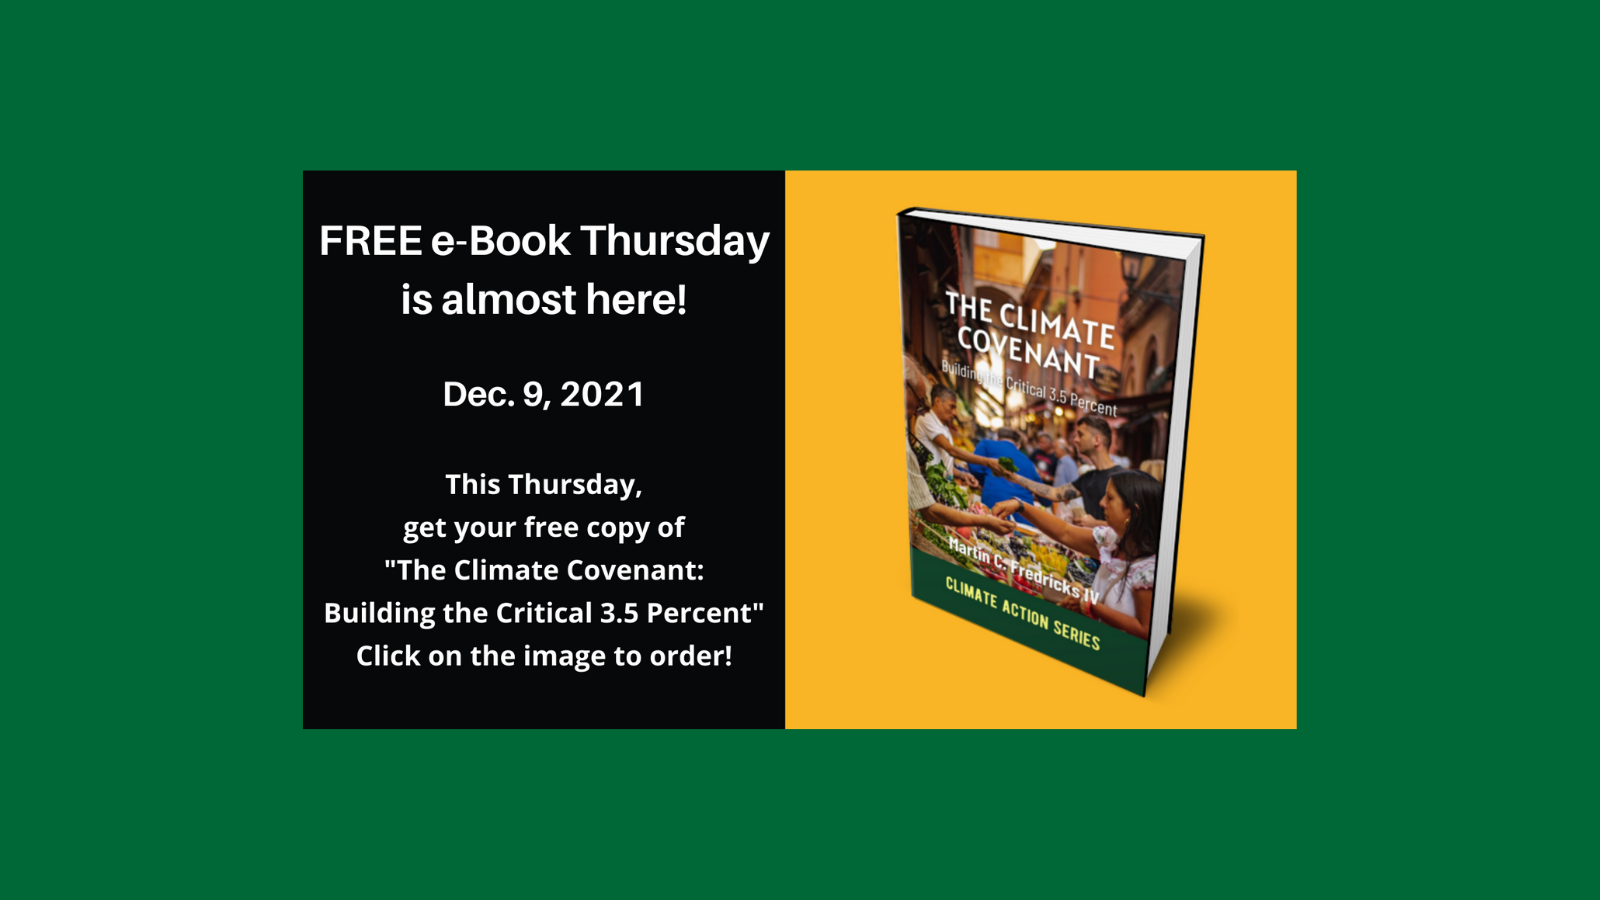 IV Words masthead - FREE Thursday, "The Climate Covenant"